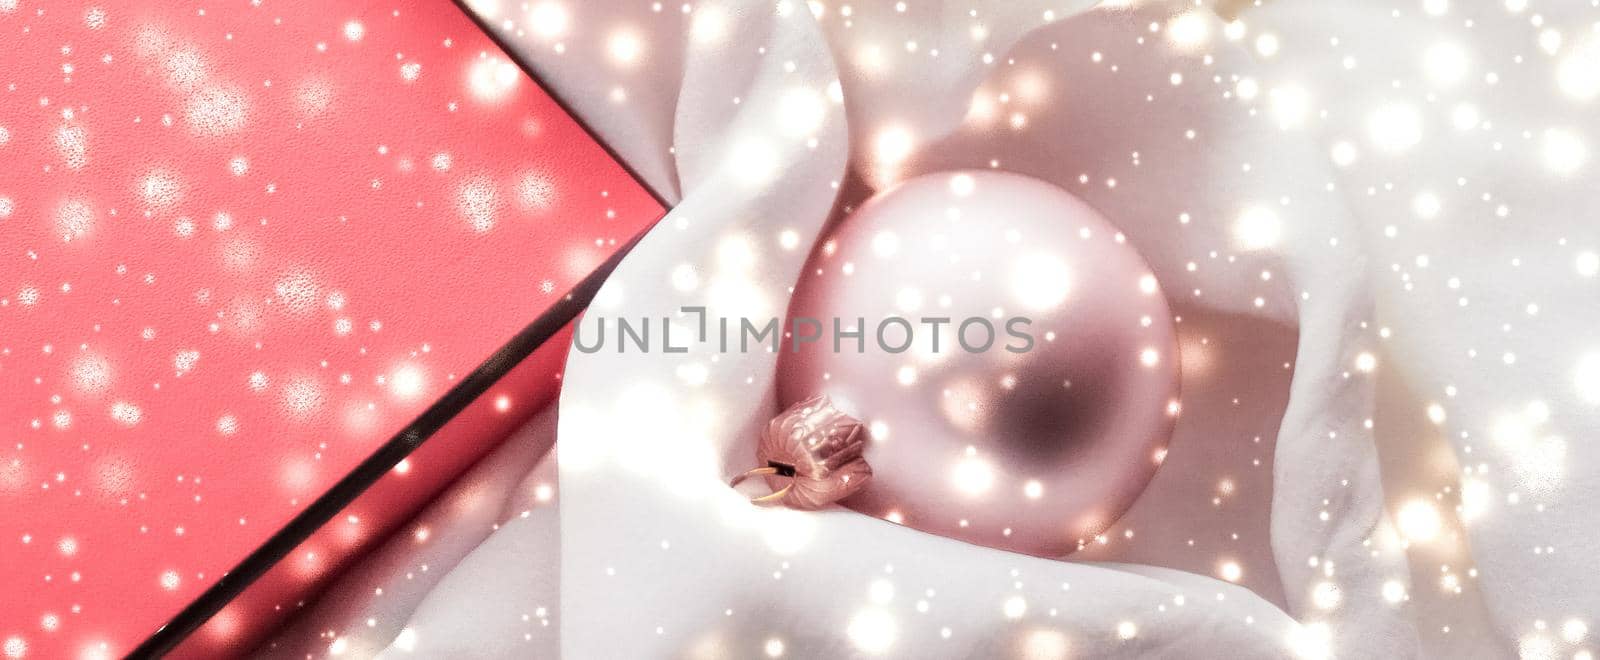 Christmas magic holiday background, festive baubles, coral vintage gift box and golden glitter as winter season present for luxury brand design by Anneleven